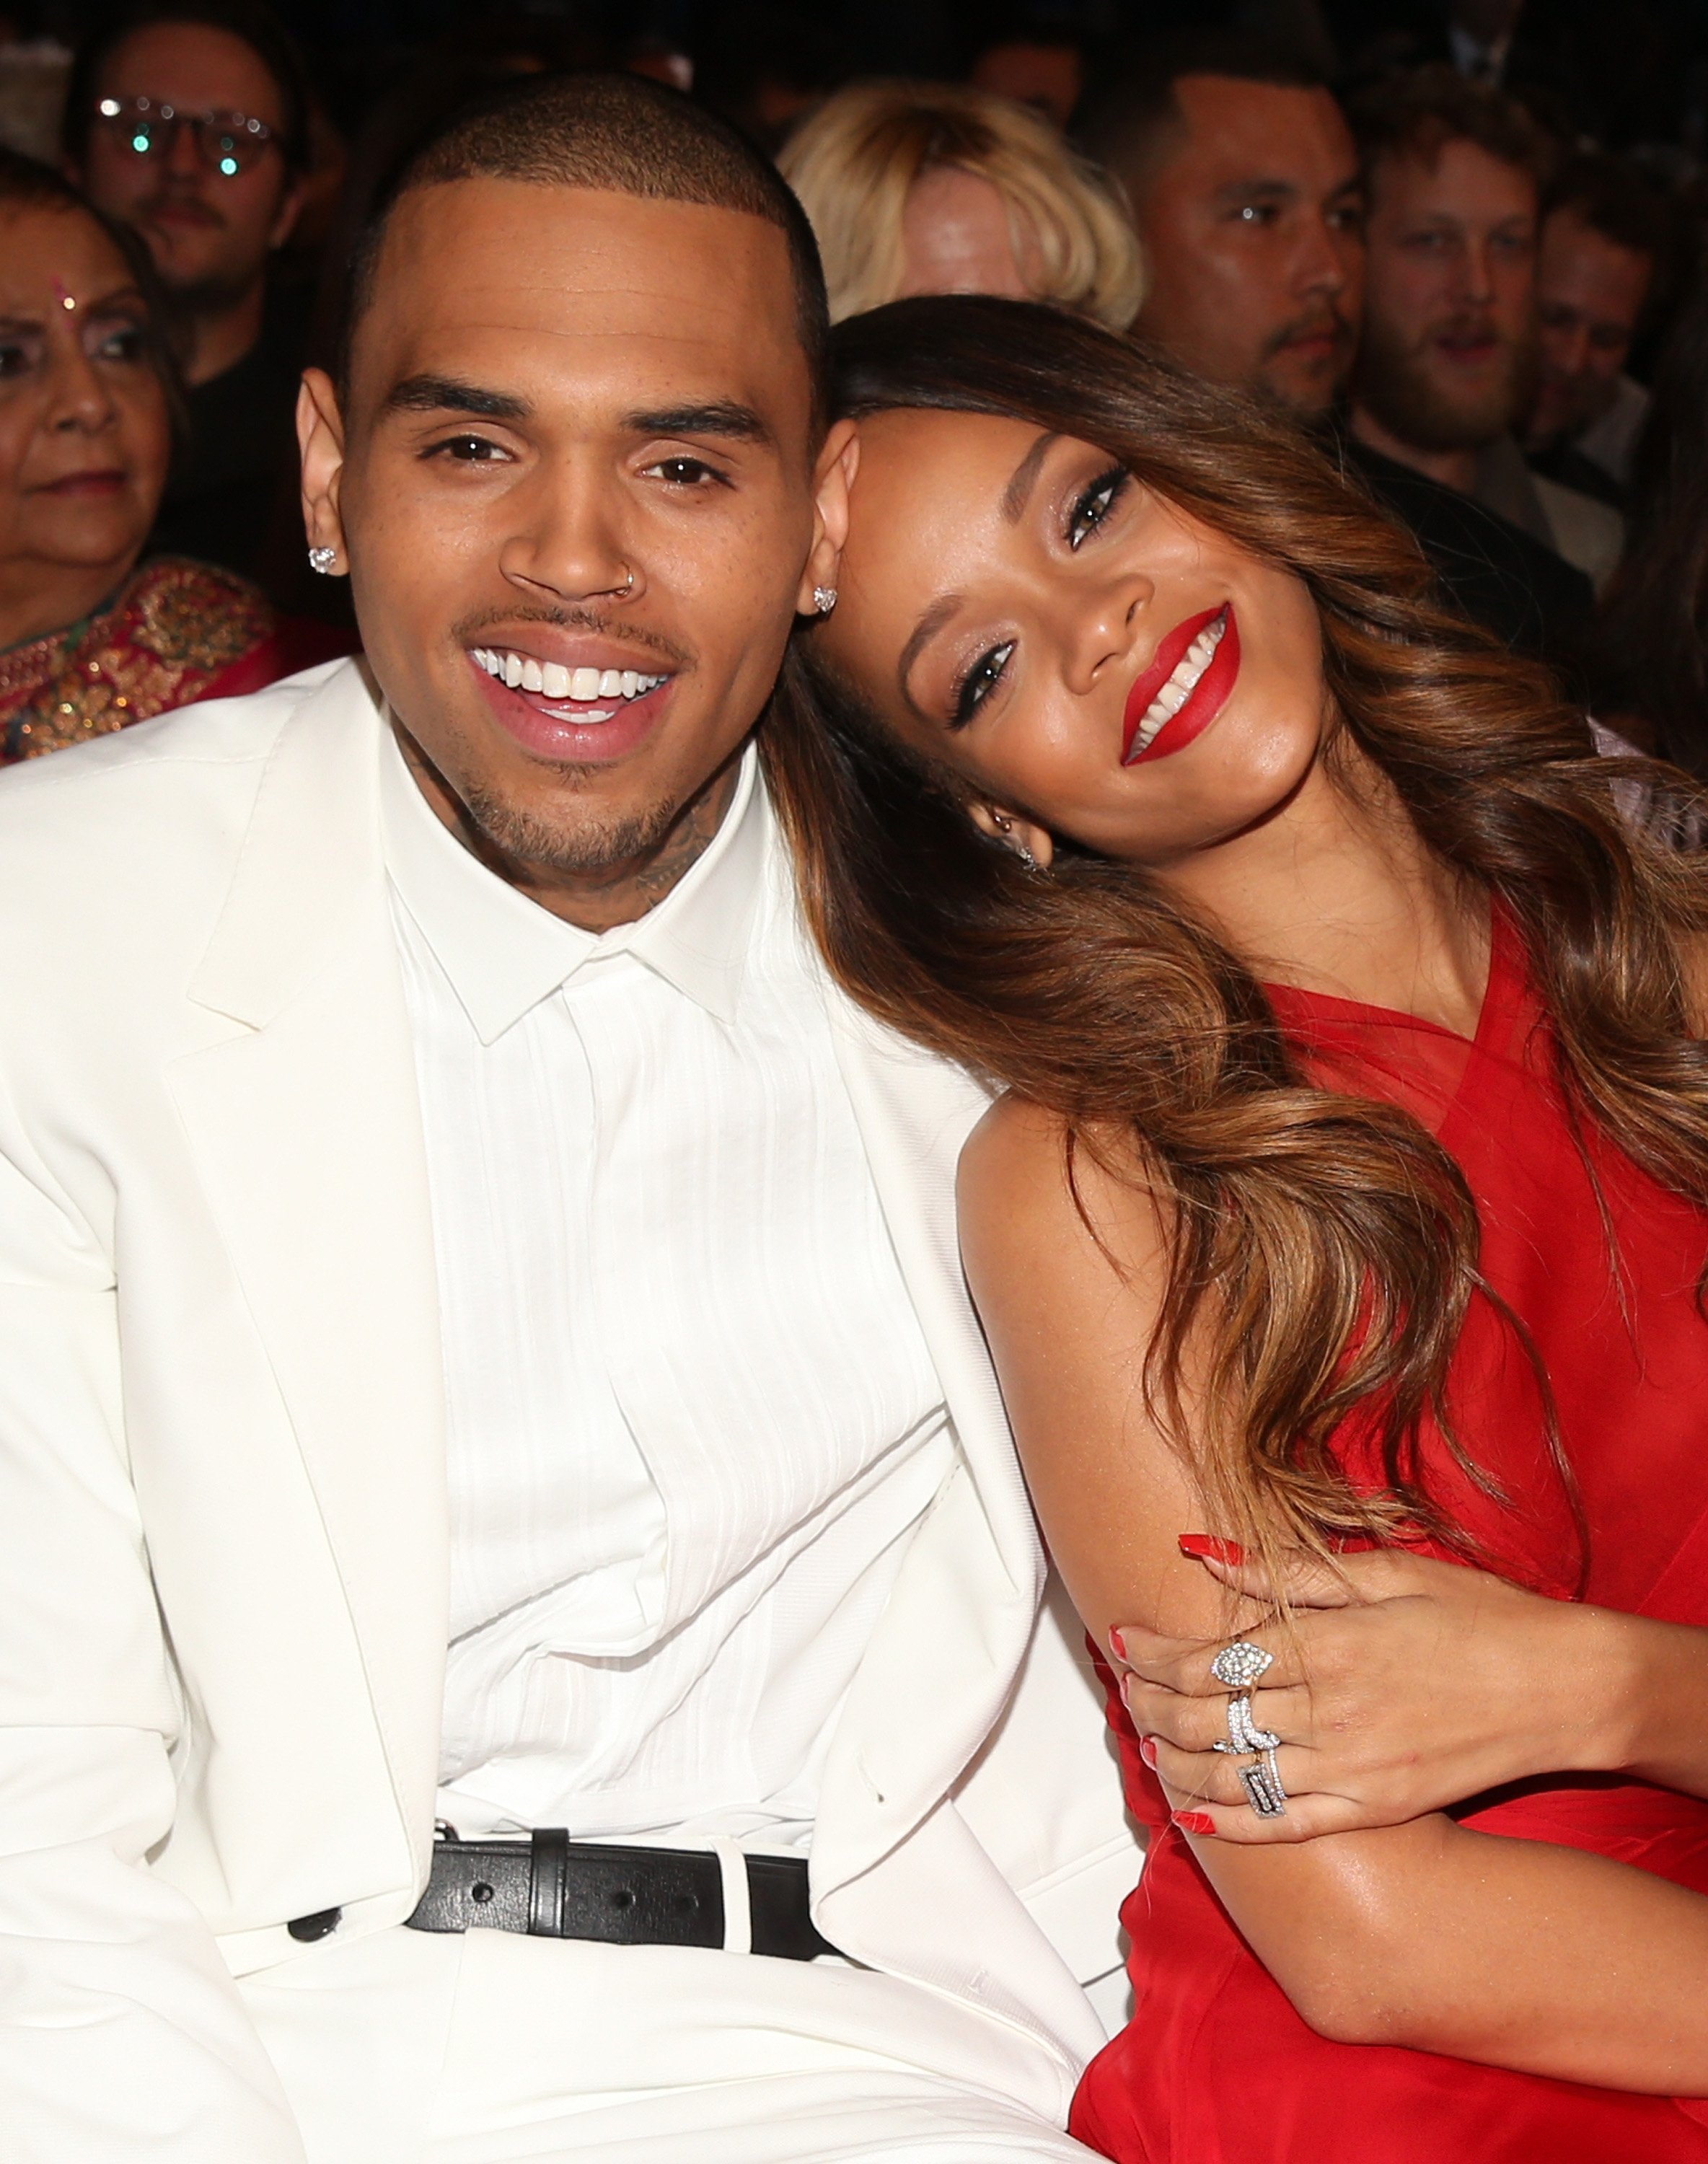 Chris Brown and Rihanna at the 55th Annual GRAMMY Awards on February 10, 2013 in Los Angeles, California. | Source: Getty Images